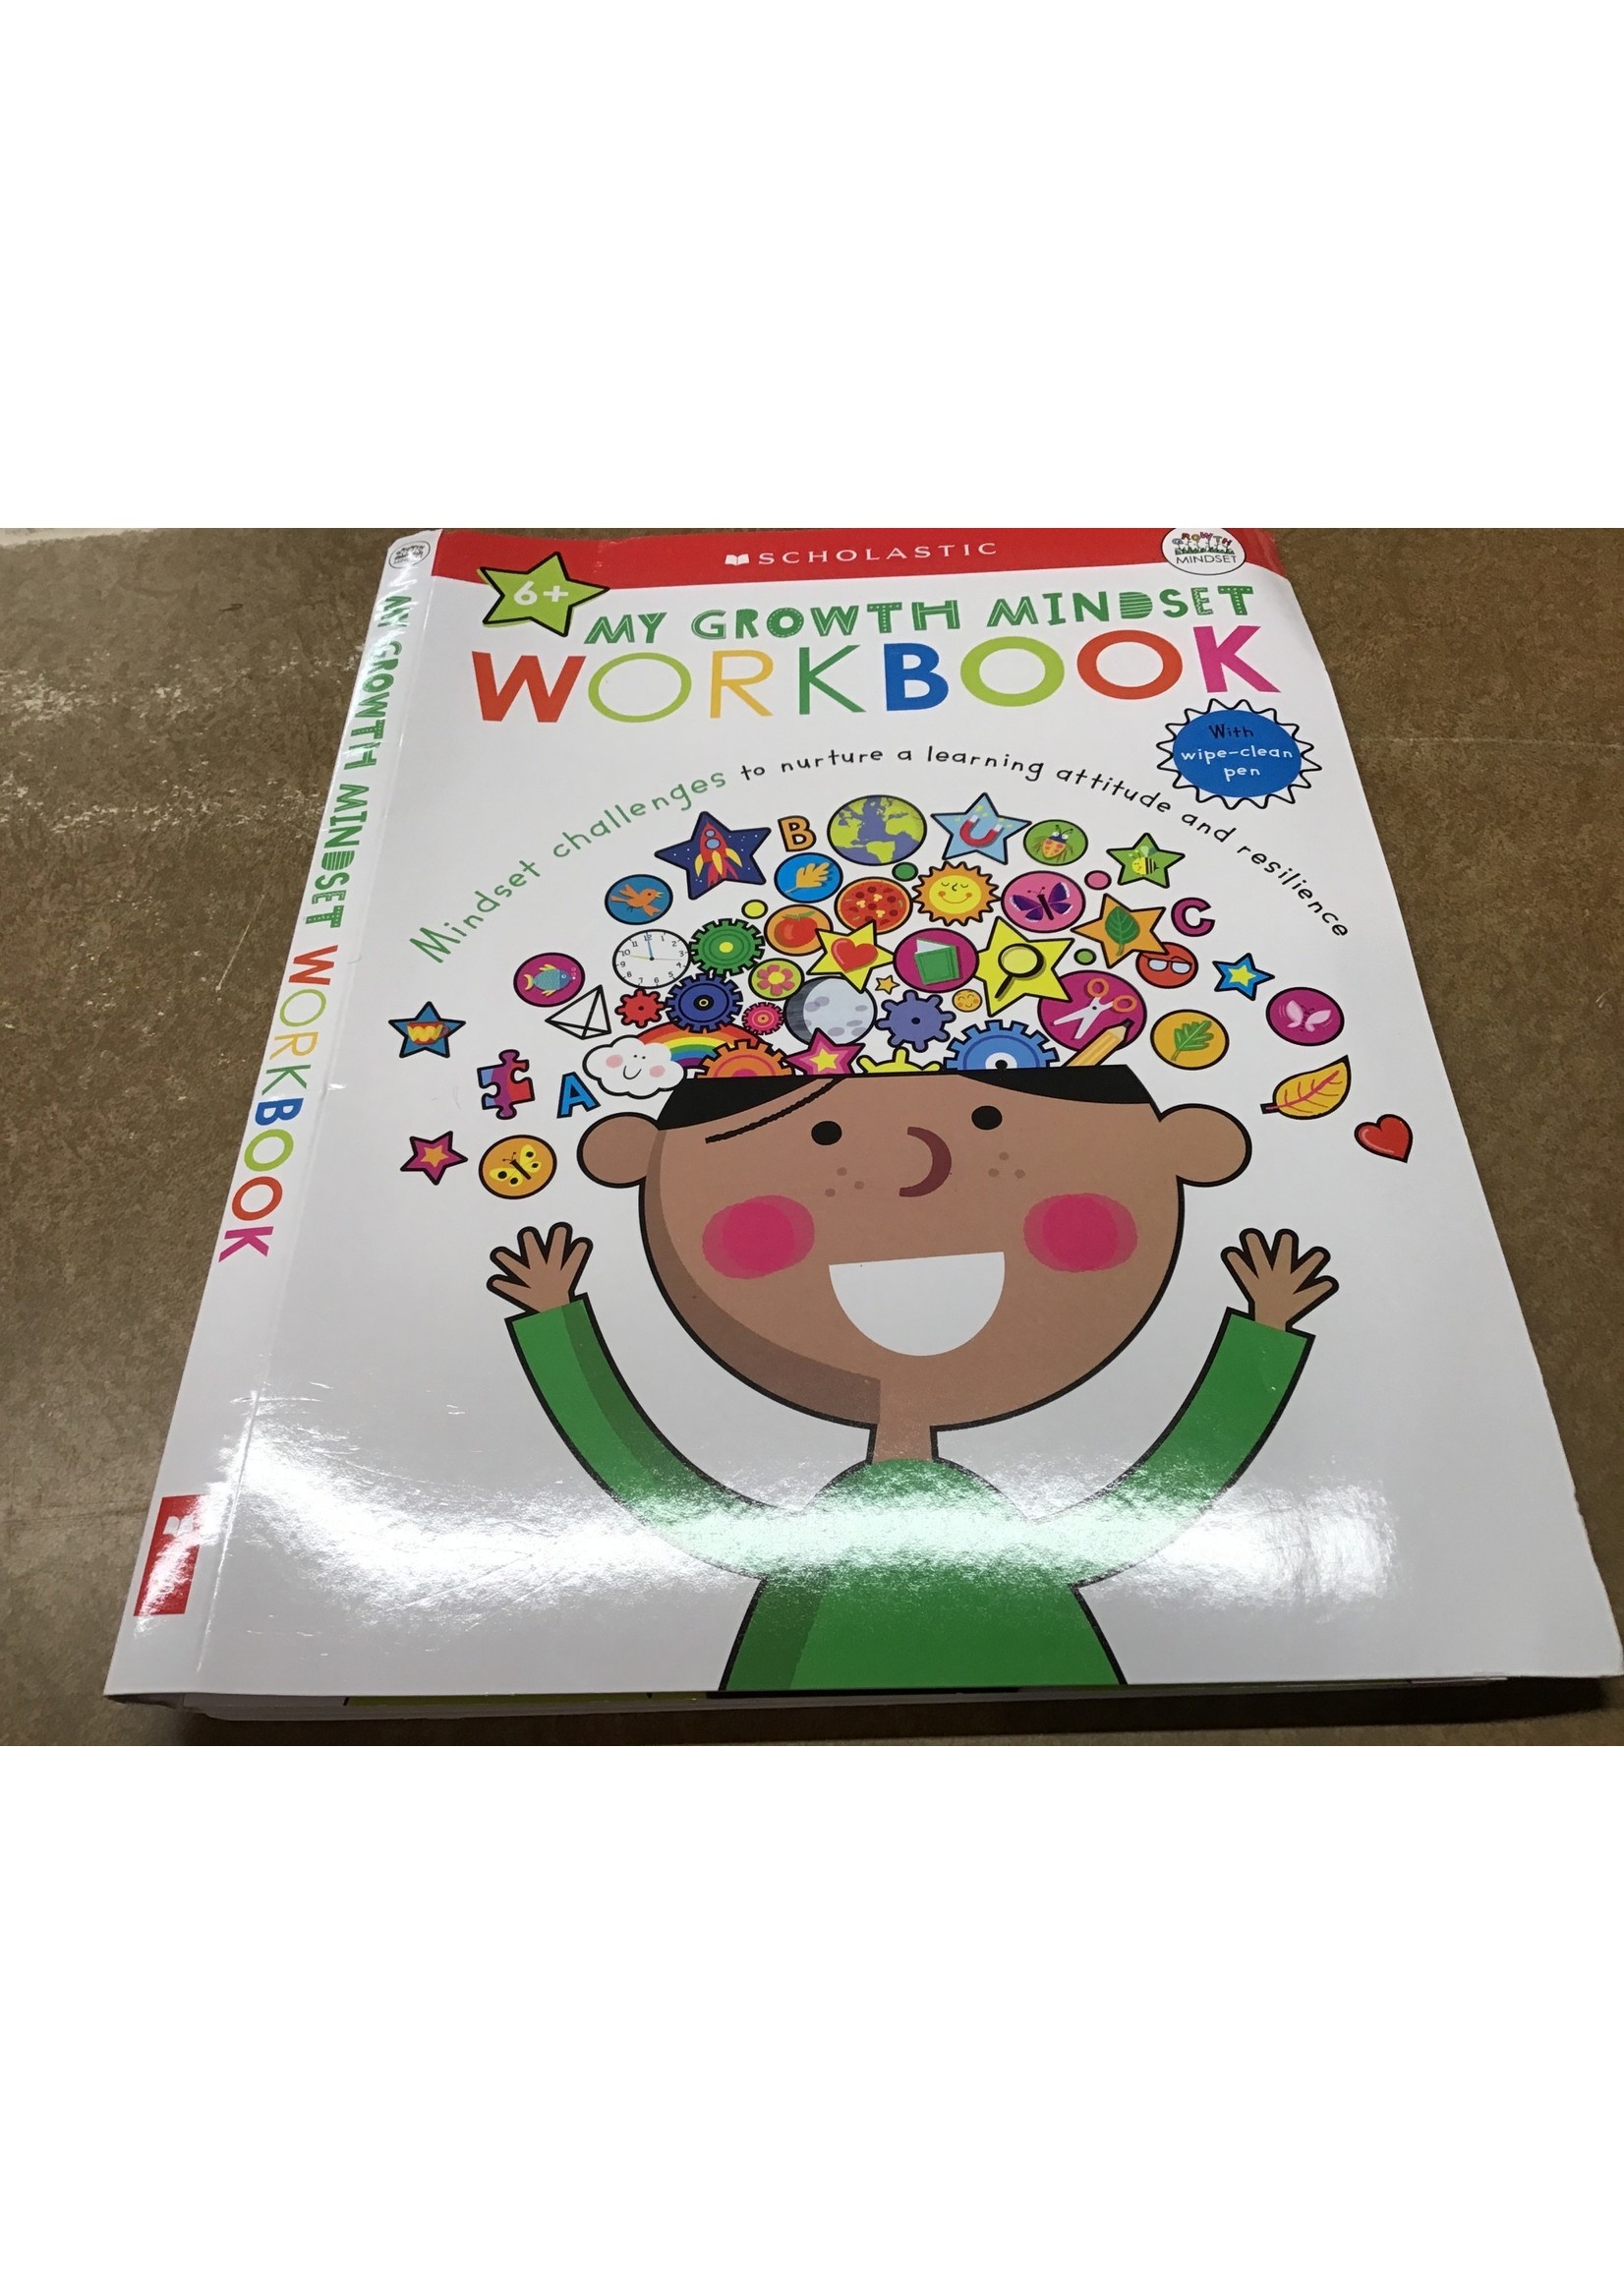 My Growth Mindset Workbook: Scholastic Early Learners (My Growth Mindset) - (Paperback)